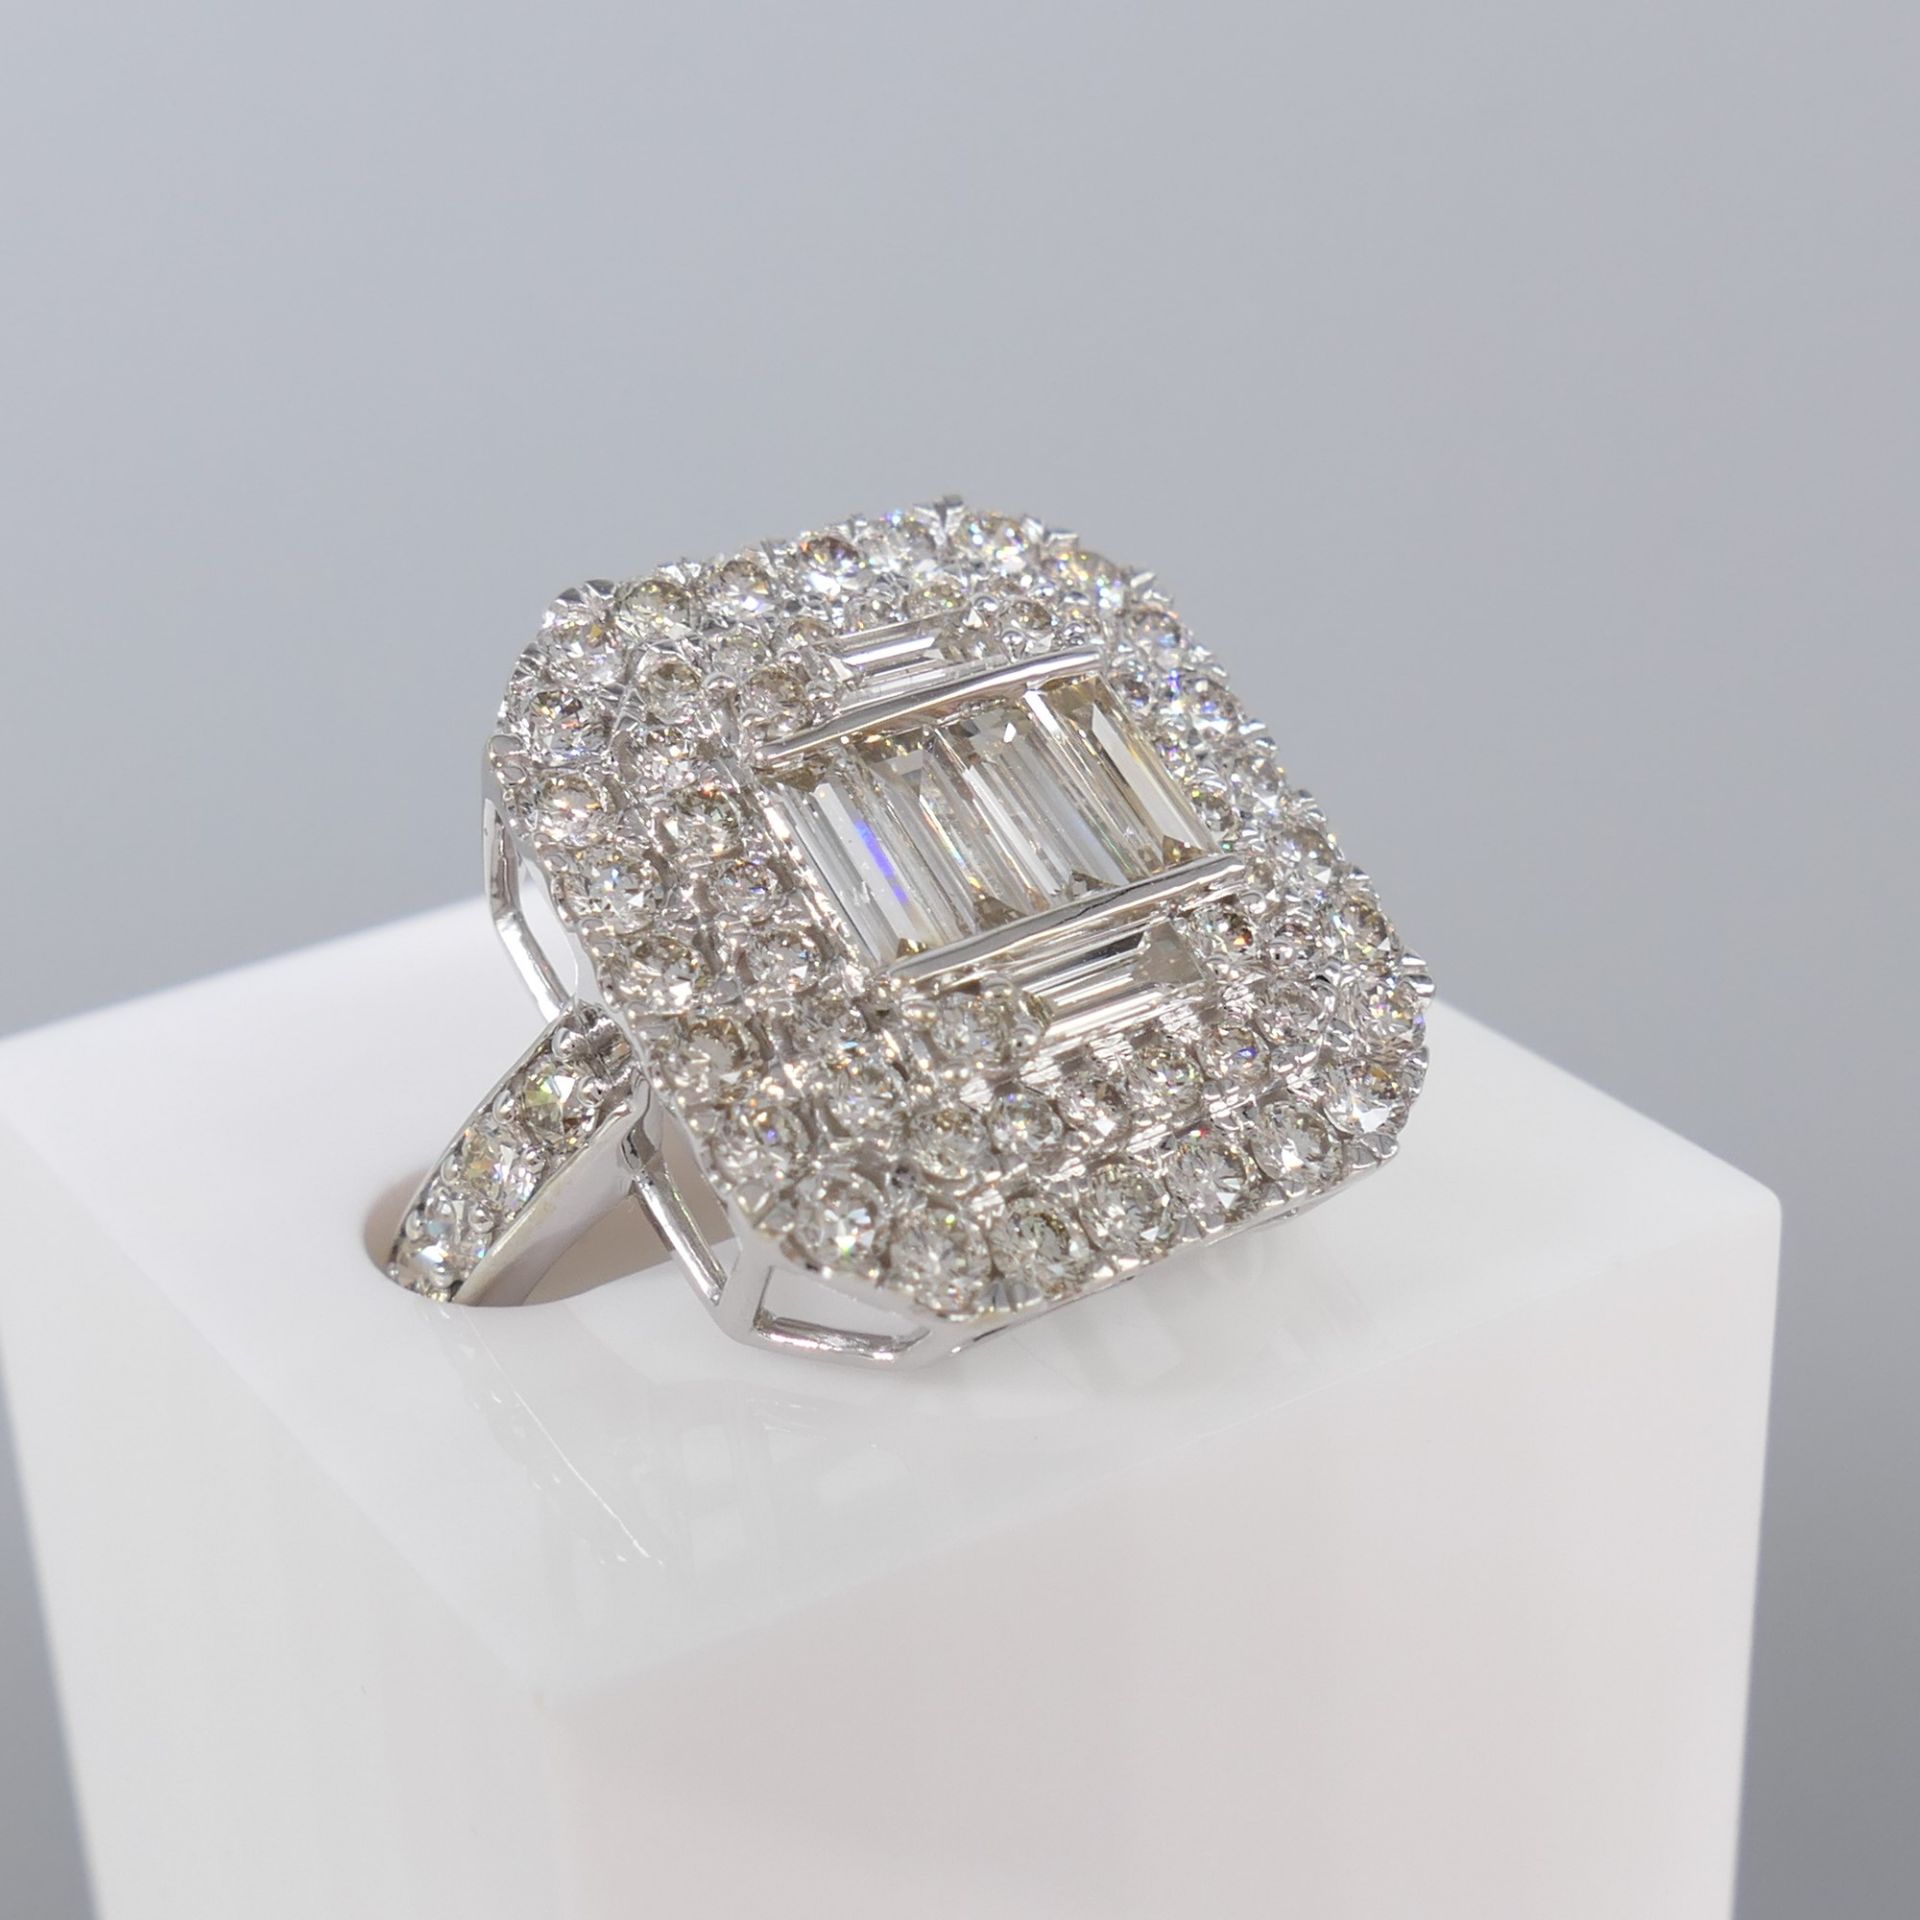 Large and Impressive White Gold 2.75 Carat Diamond Cocktail Ring - Image 2 of 8